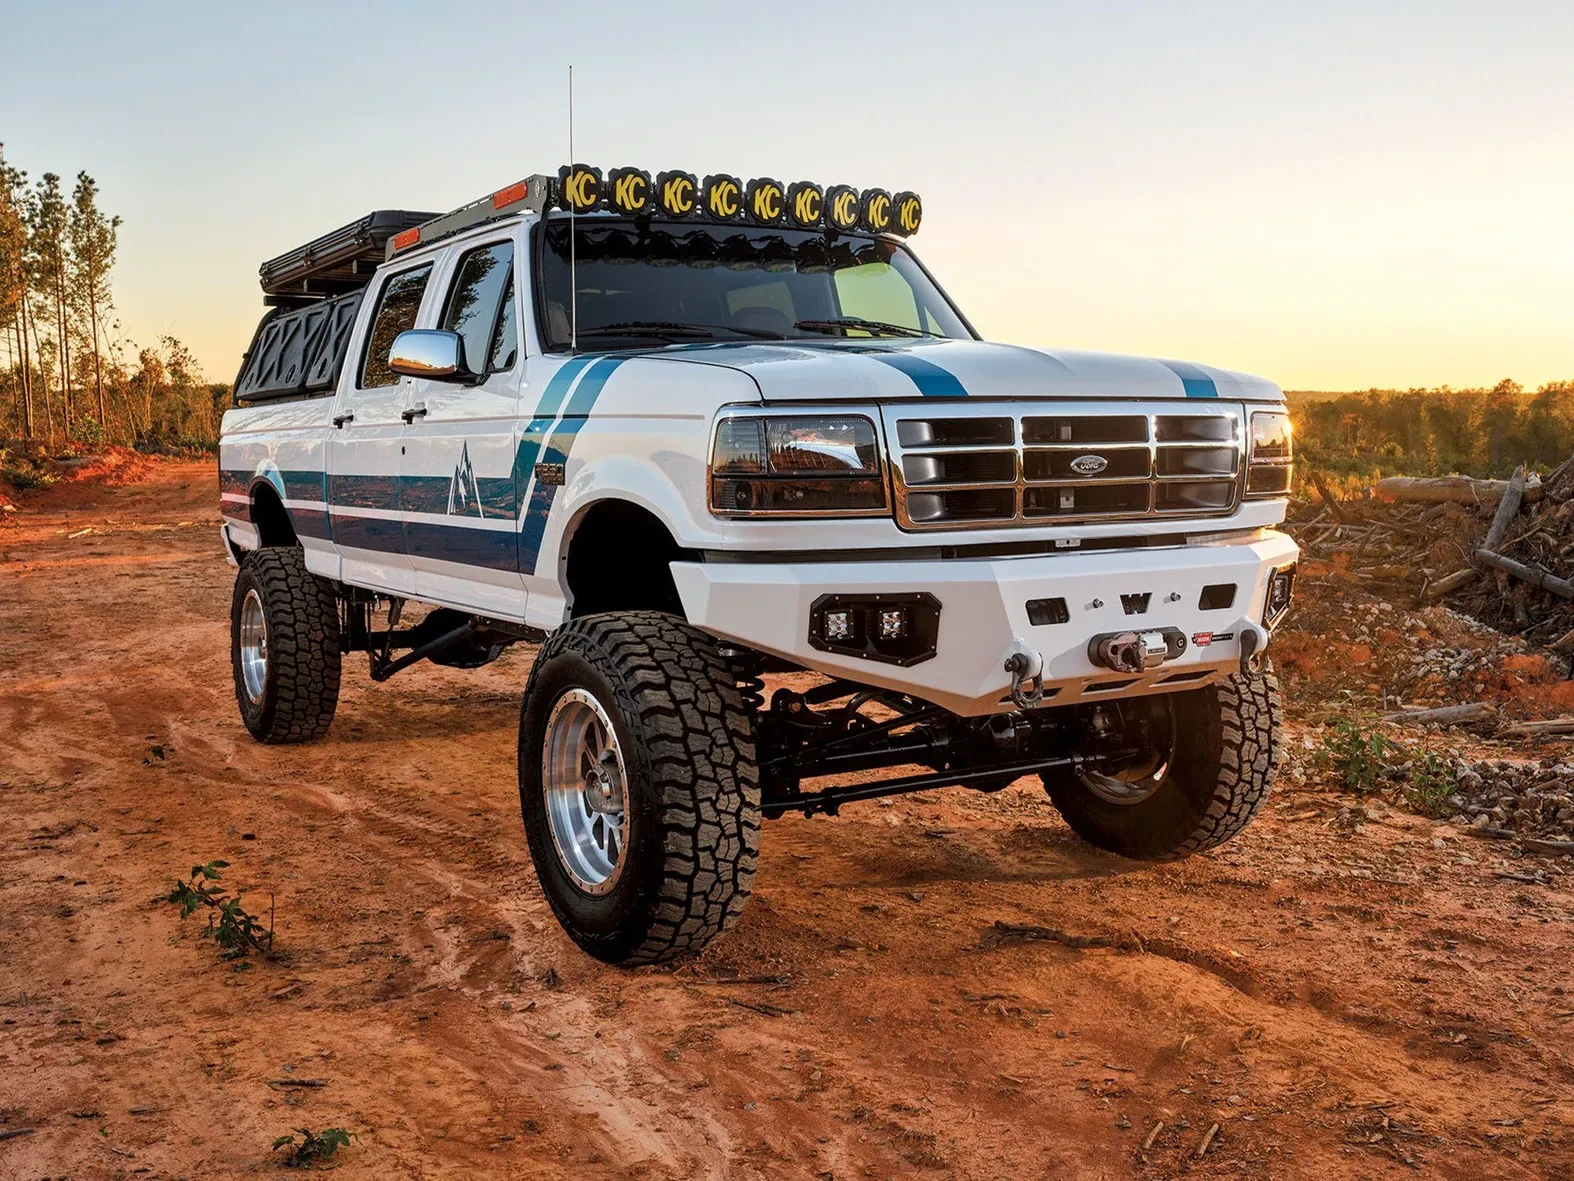 Project Artemis: The Ultimate Off-Road Overlanding Vehicle is a Ford F-250